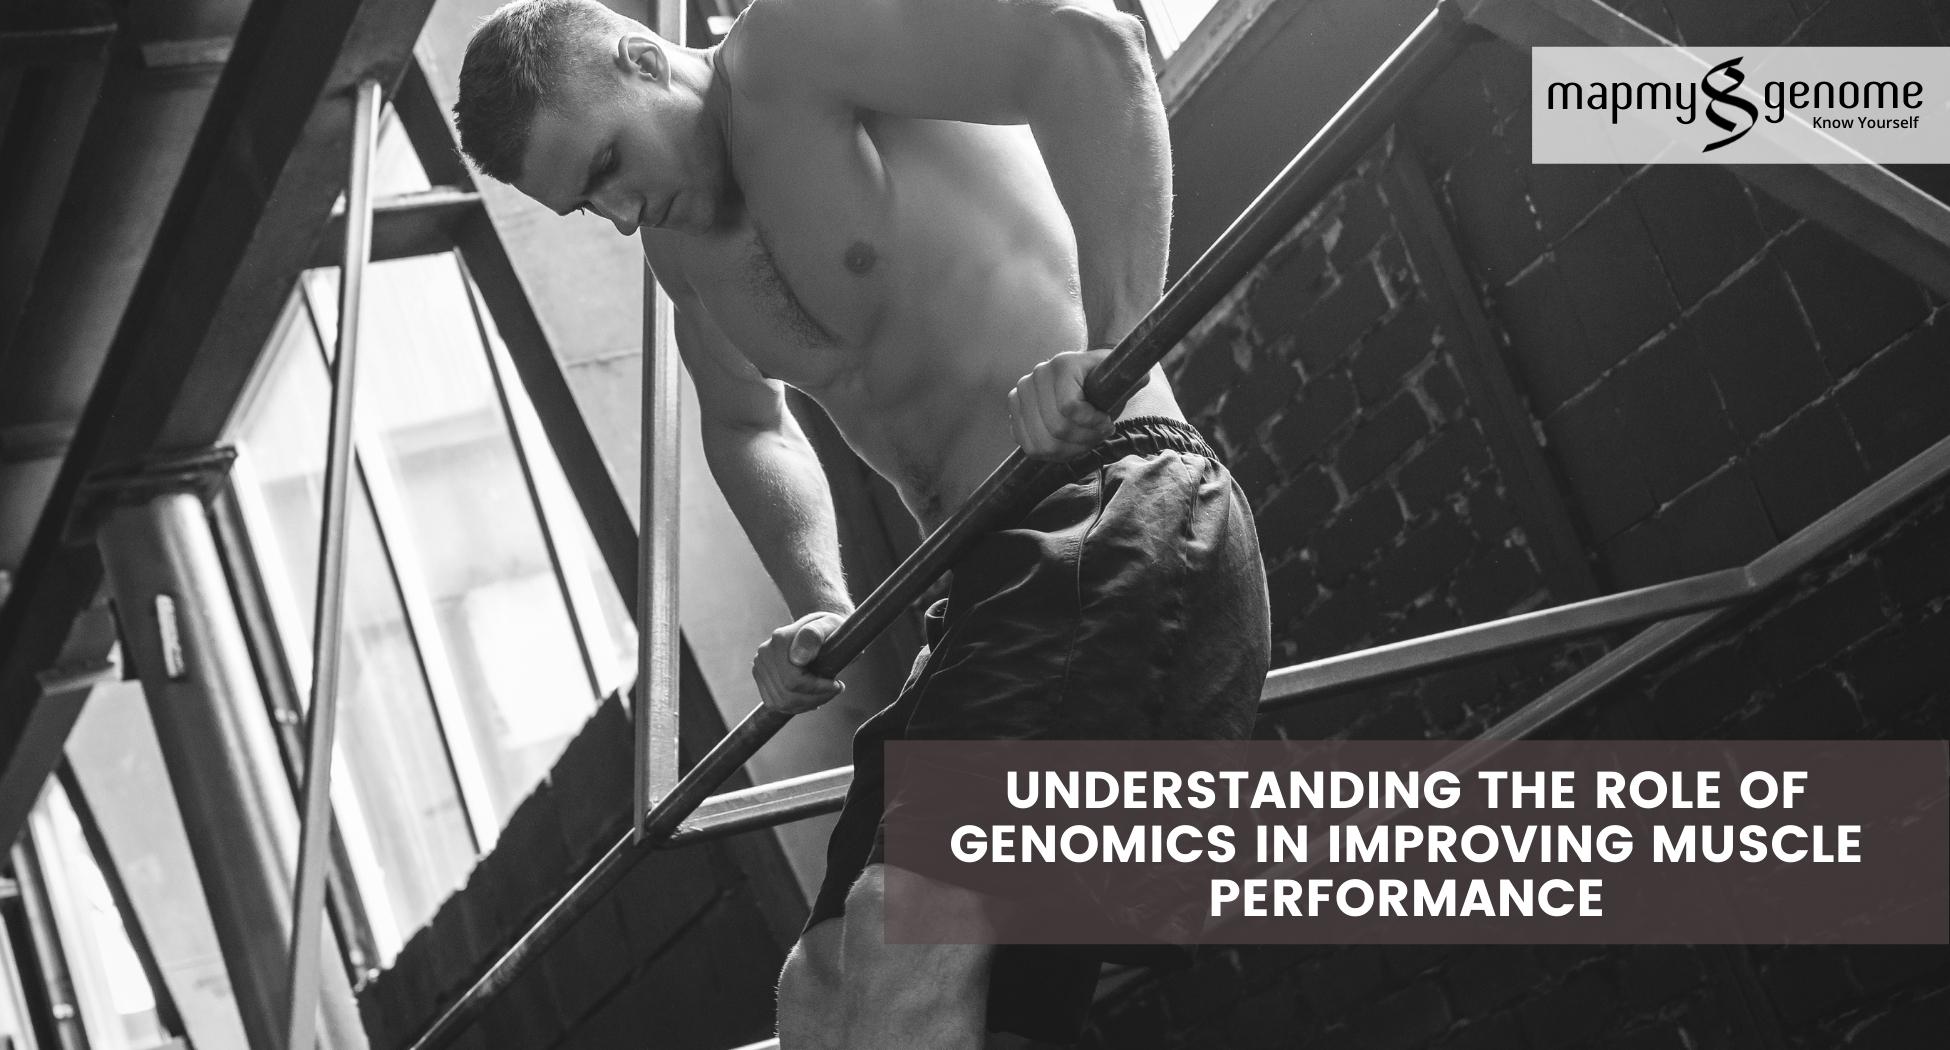 Understanding The Role of Genomics in Improving Muscle Performance